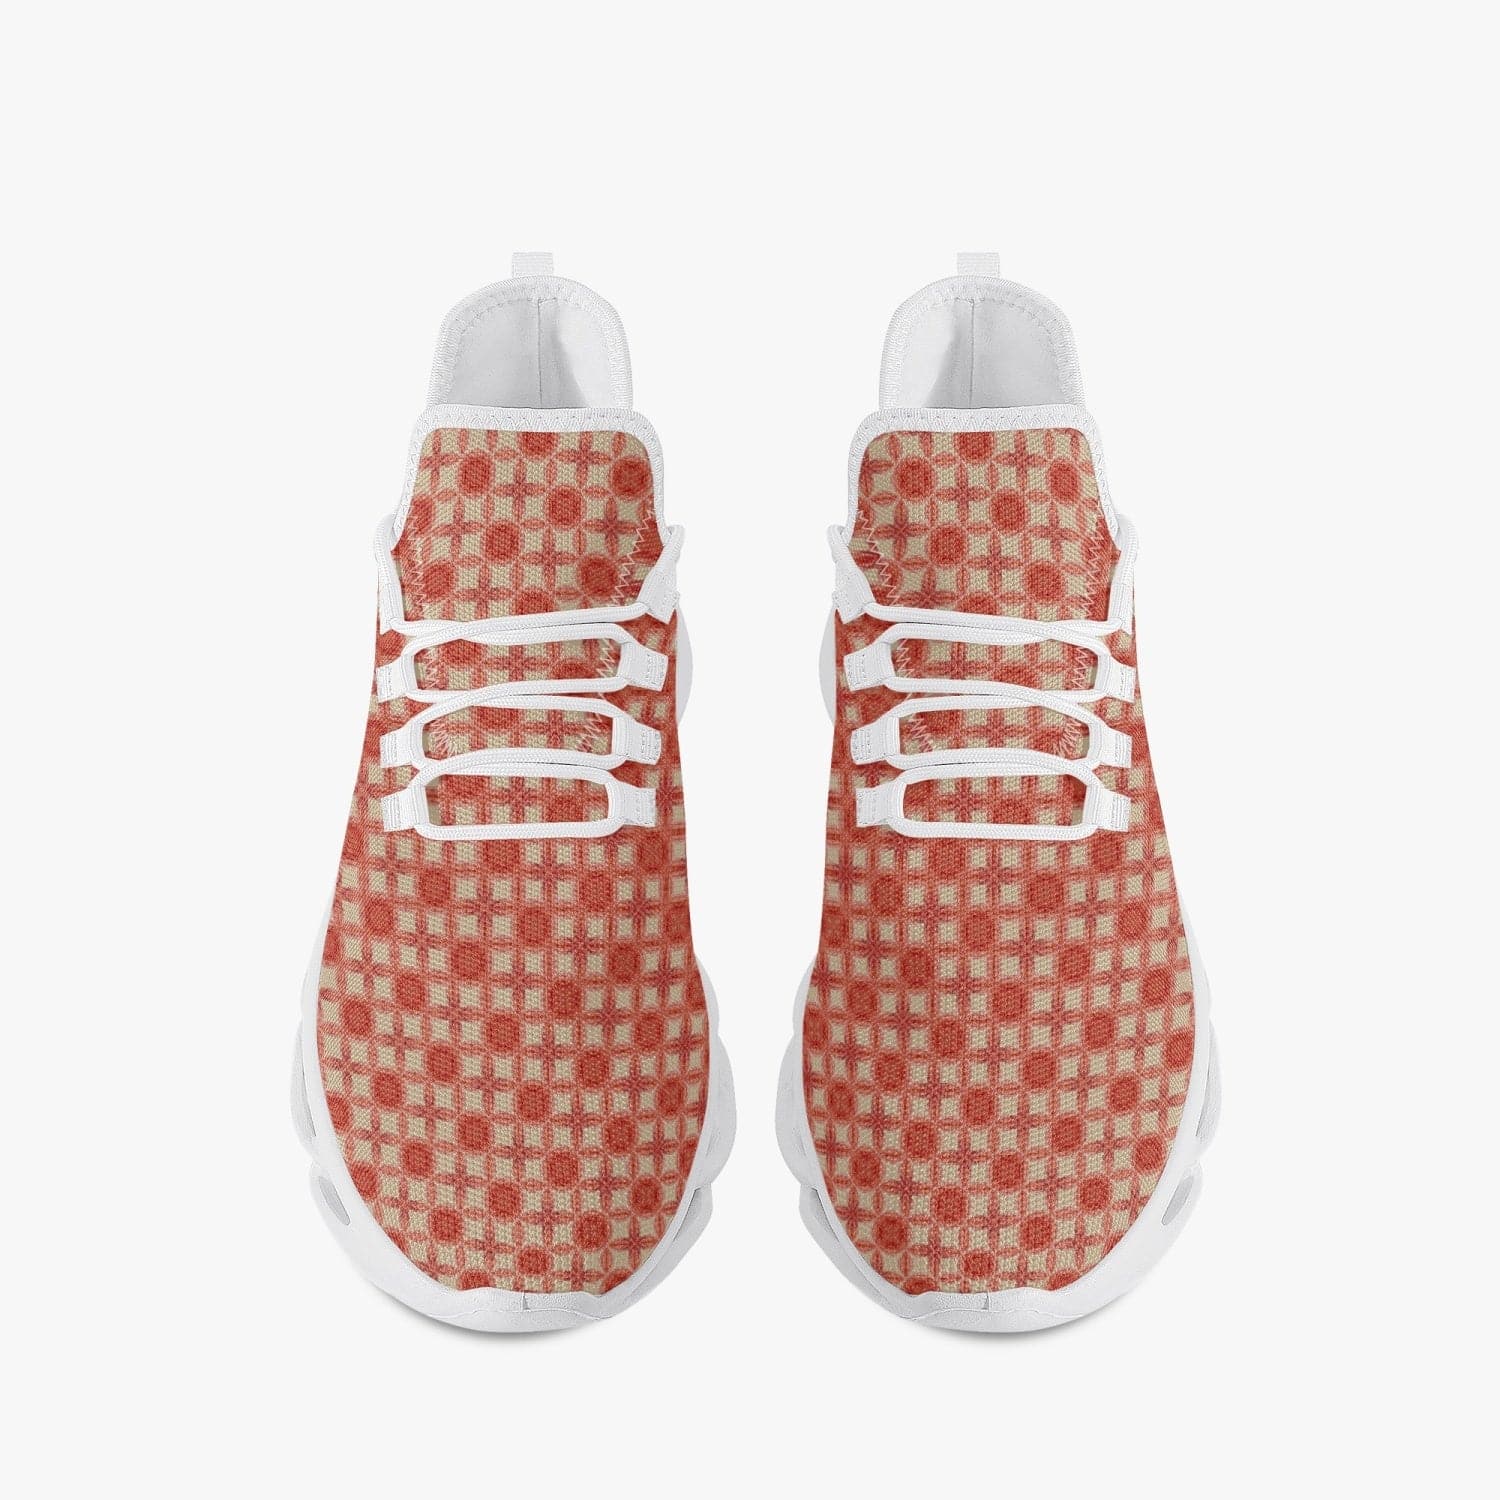 Red Buttercup fine Patterned trendy Bounce Mesh Knit Sneakers - White, by Sensus Studio Design